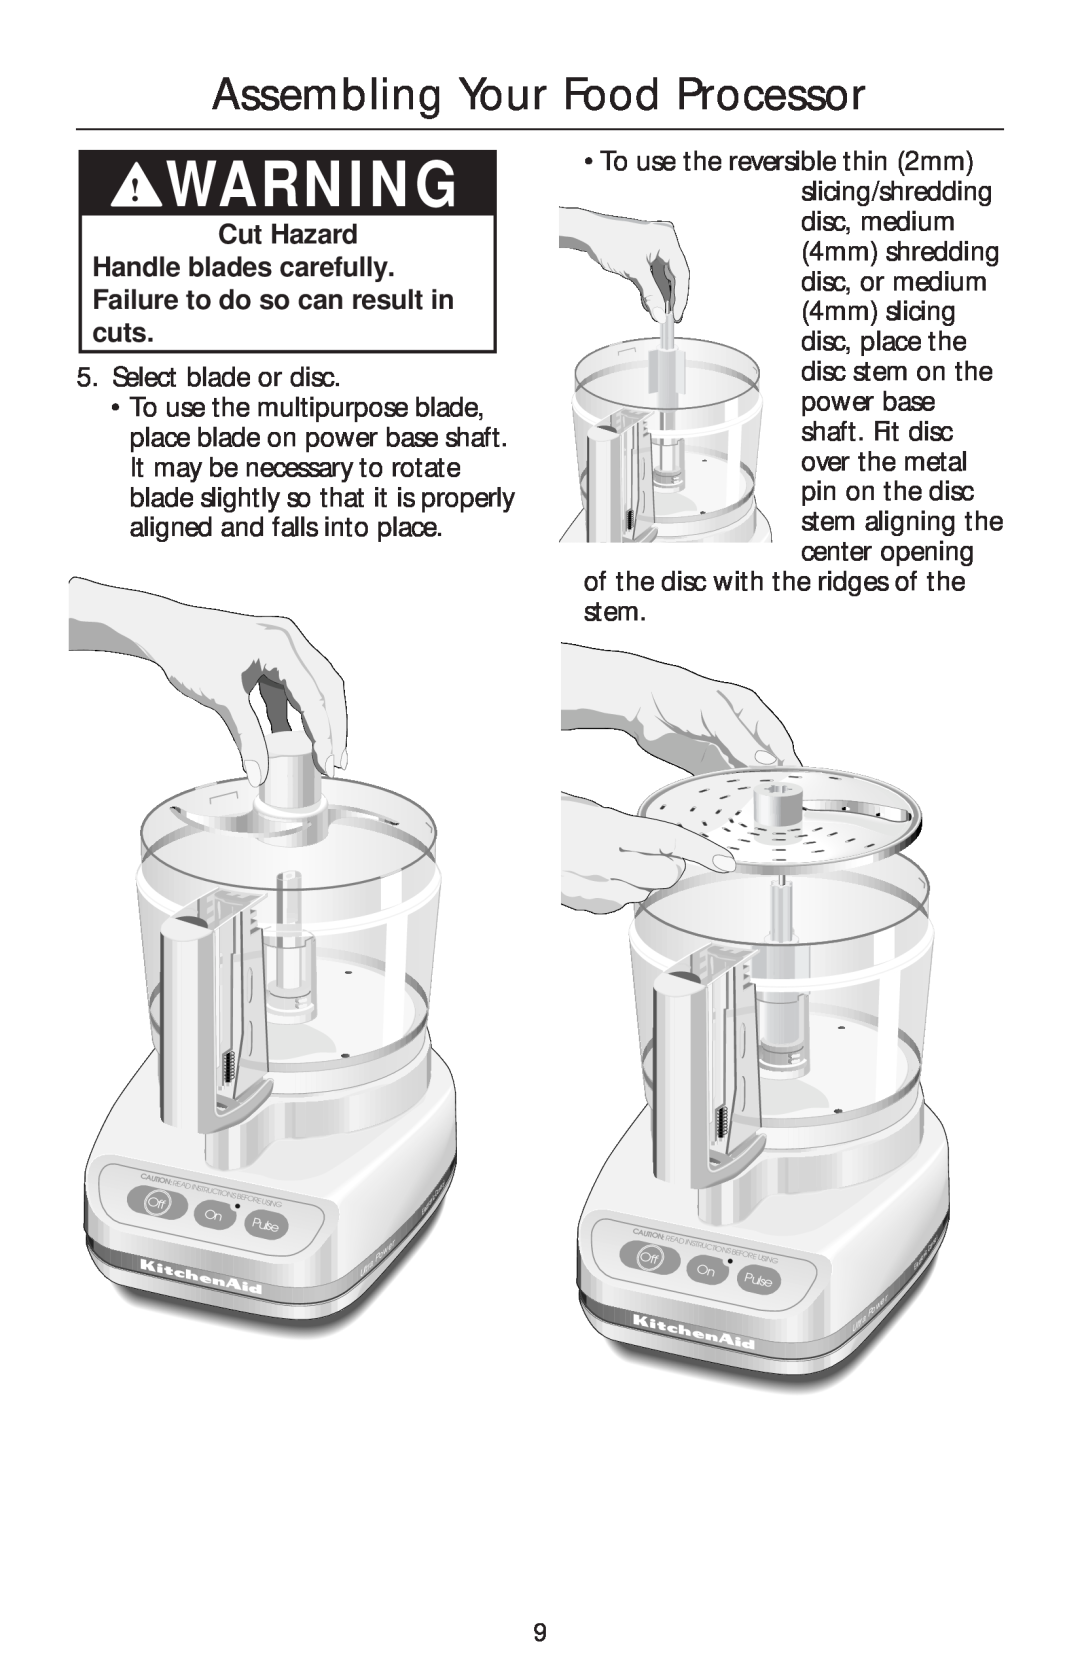 Kenmore KFPM650 Cut Hazard, Handle blades carefully. Failure to do so can result in cuts, Assembling Your Food Processor 